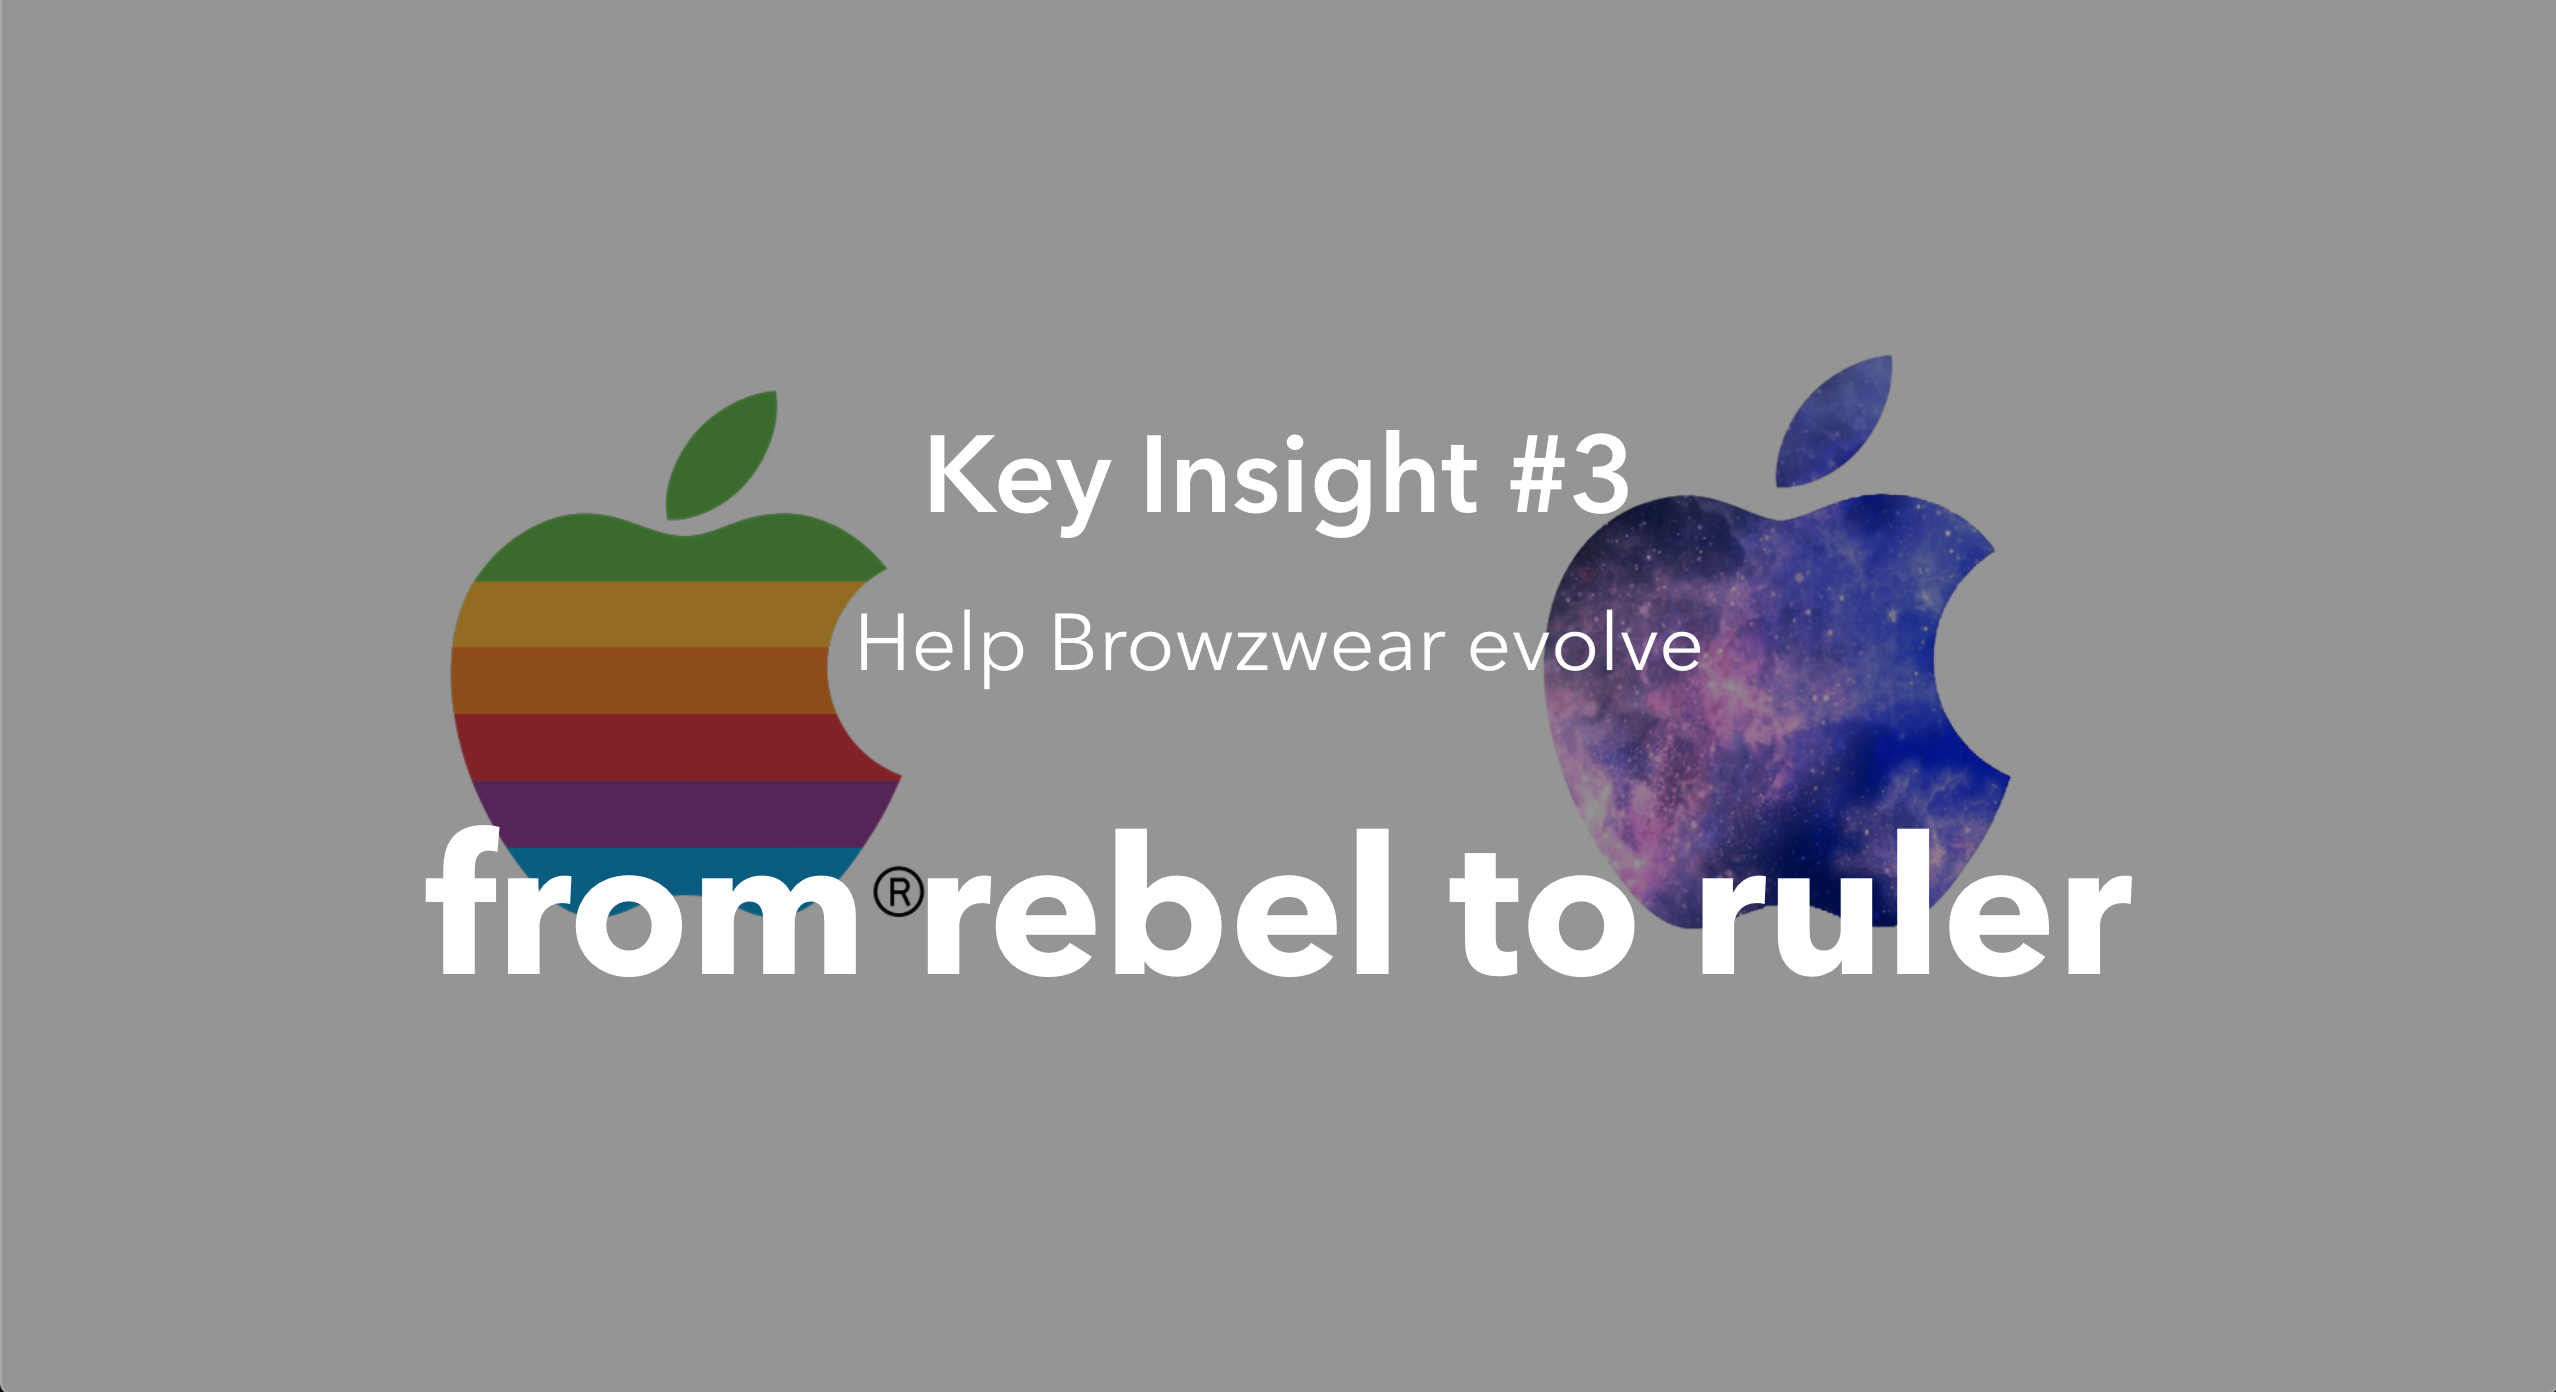 solution #5 - transitioning the browzwear brand from rebel to ruler brand archetype